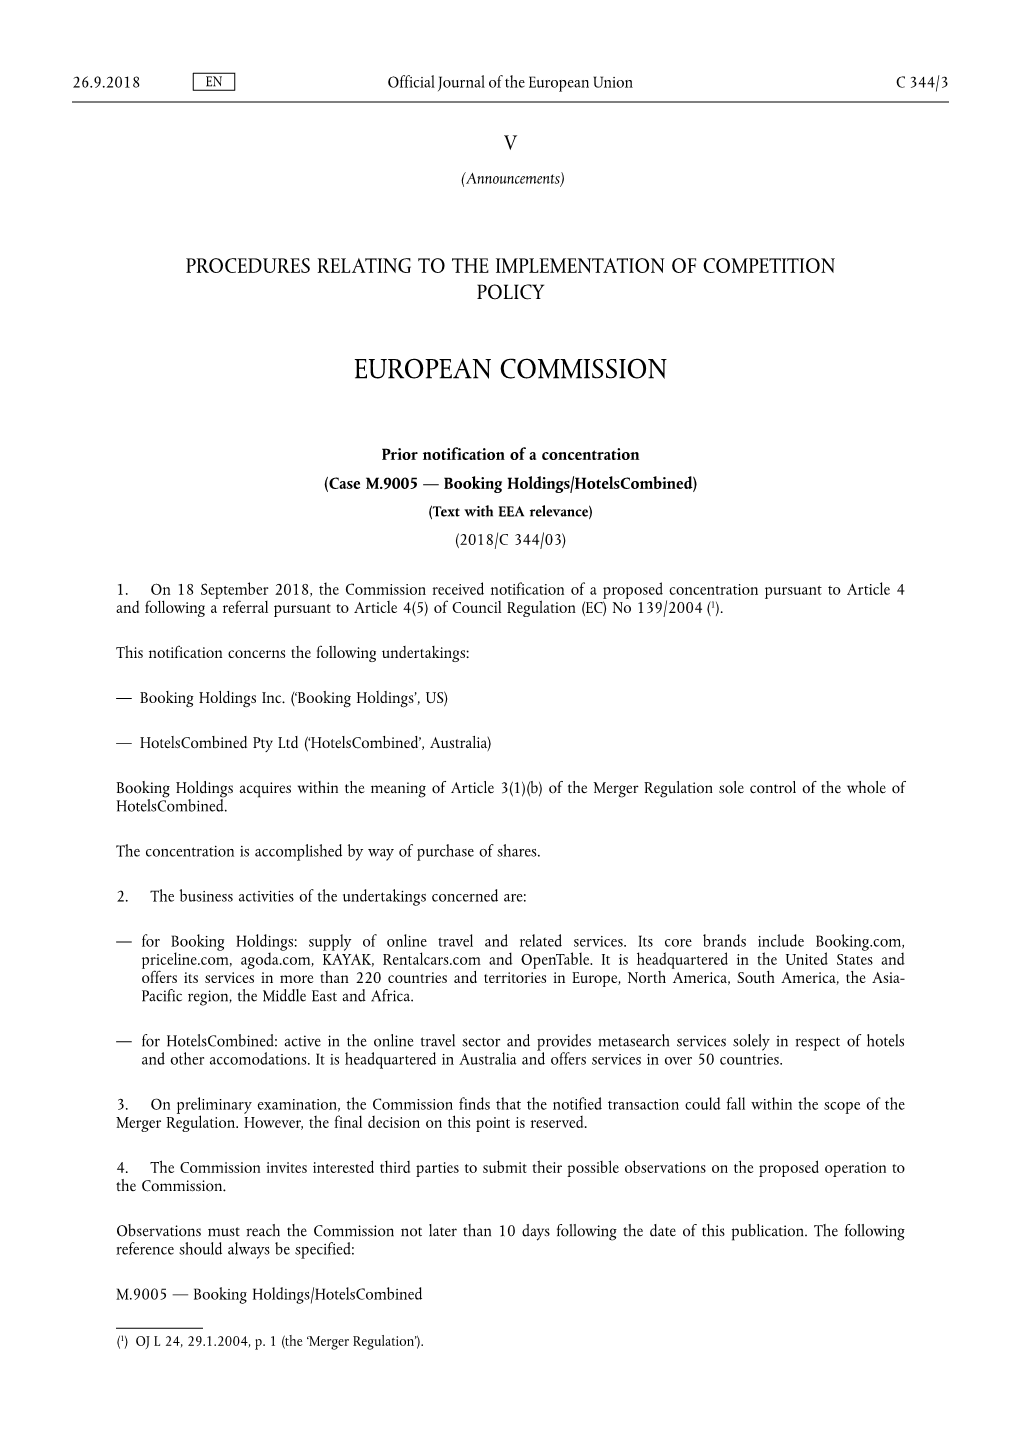 Case M.9005 — Booking Holdings/Hotelscombined) (Text with EEA Relevance) (2018/C 344/03)